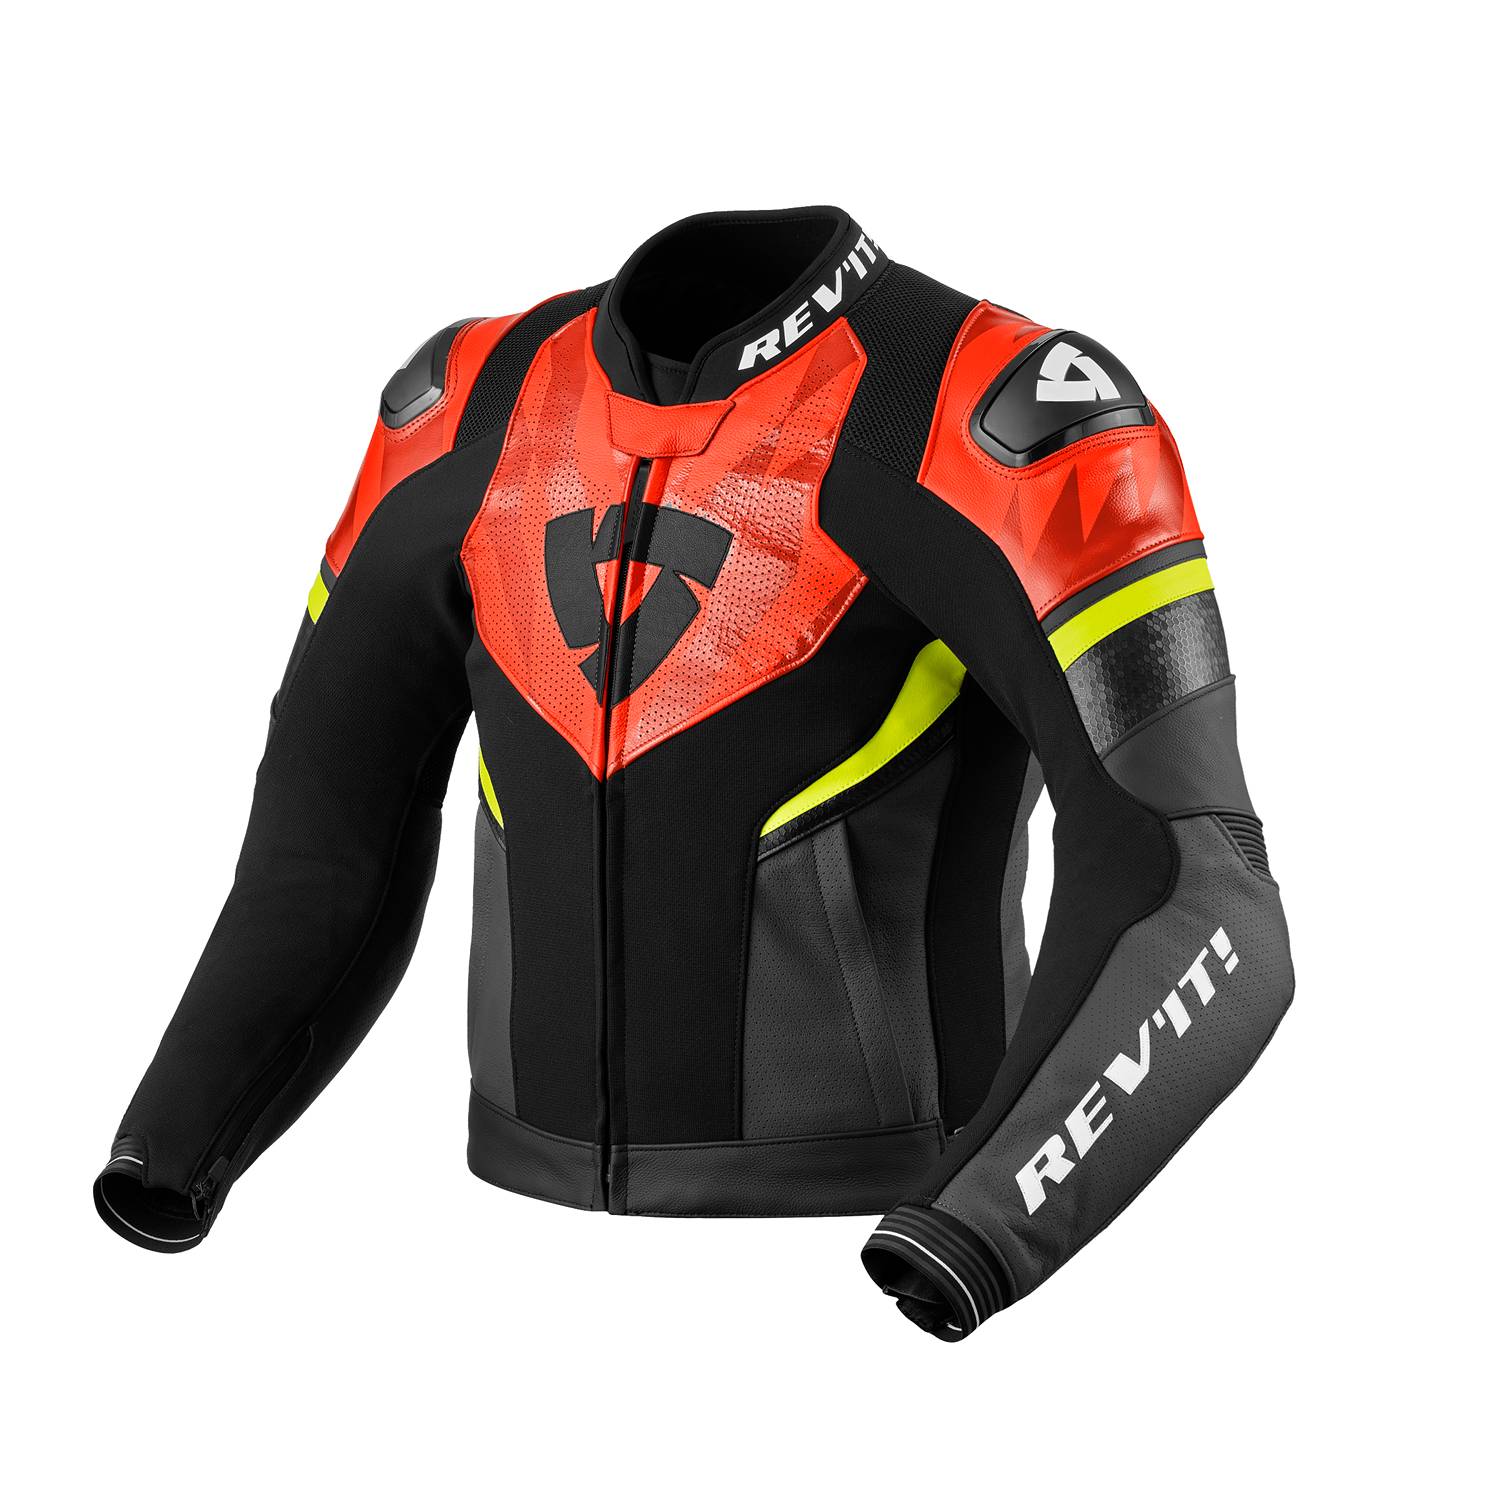 Image of REV'IT! Hyperspeed 2 Air Jacket Black Neon Red Size 50 ID 8700001358545